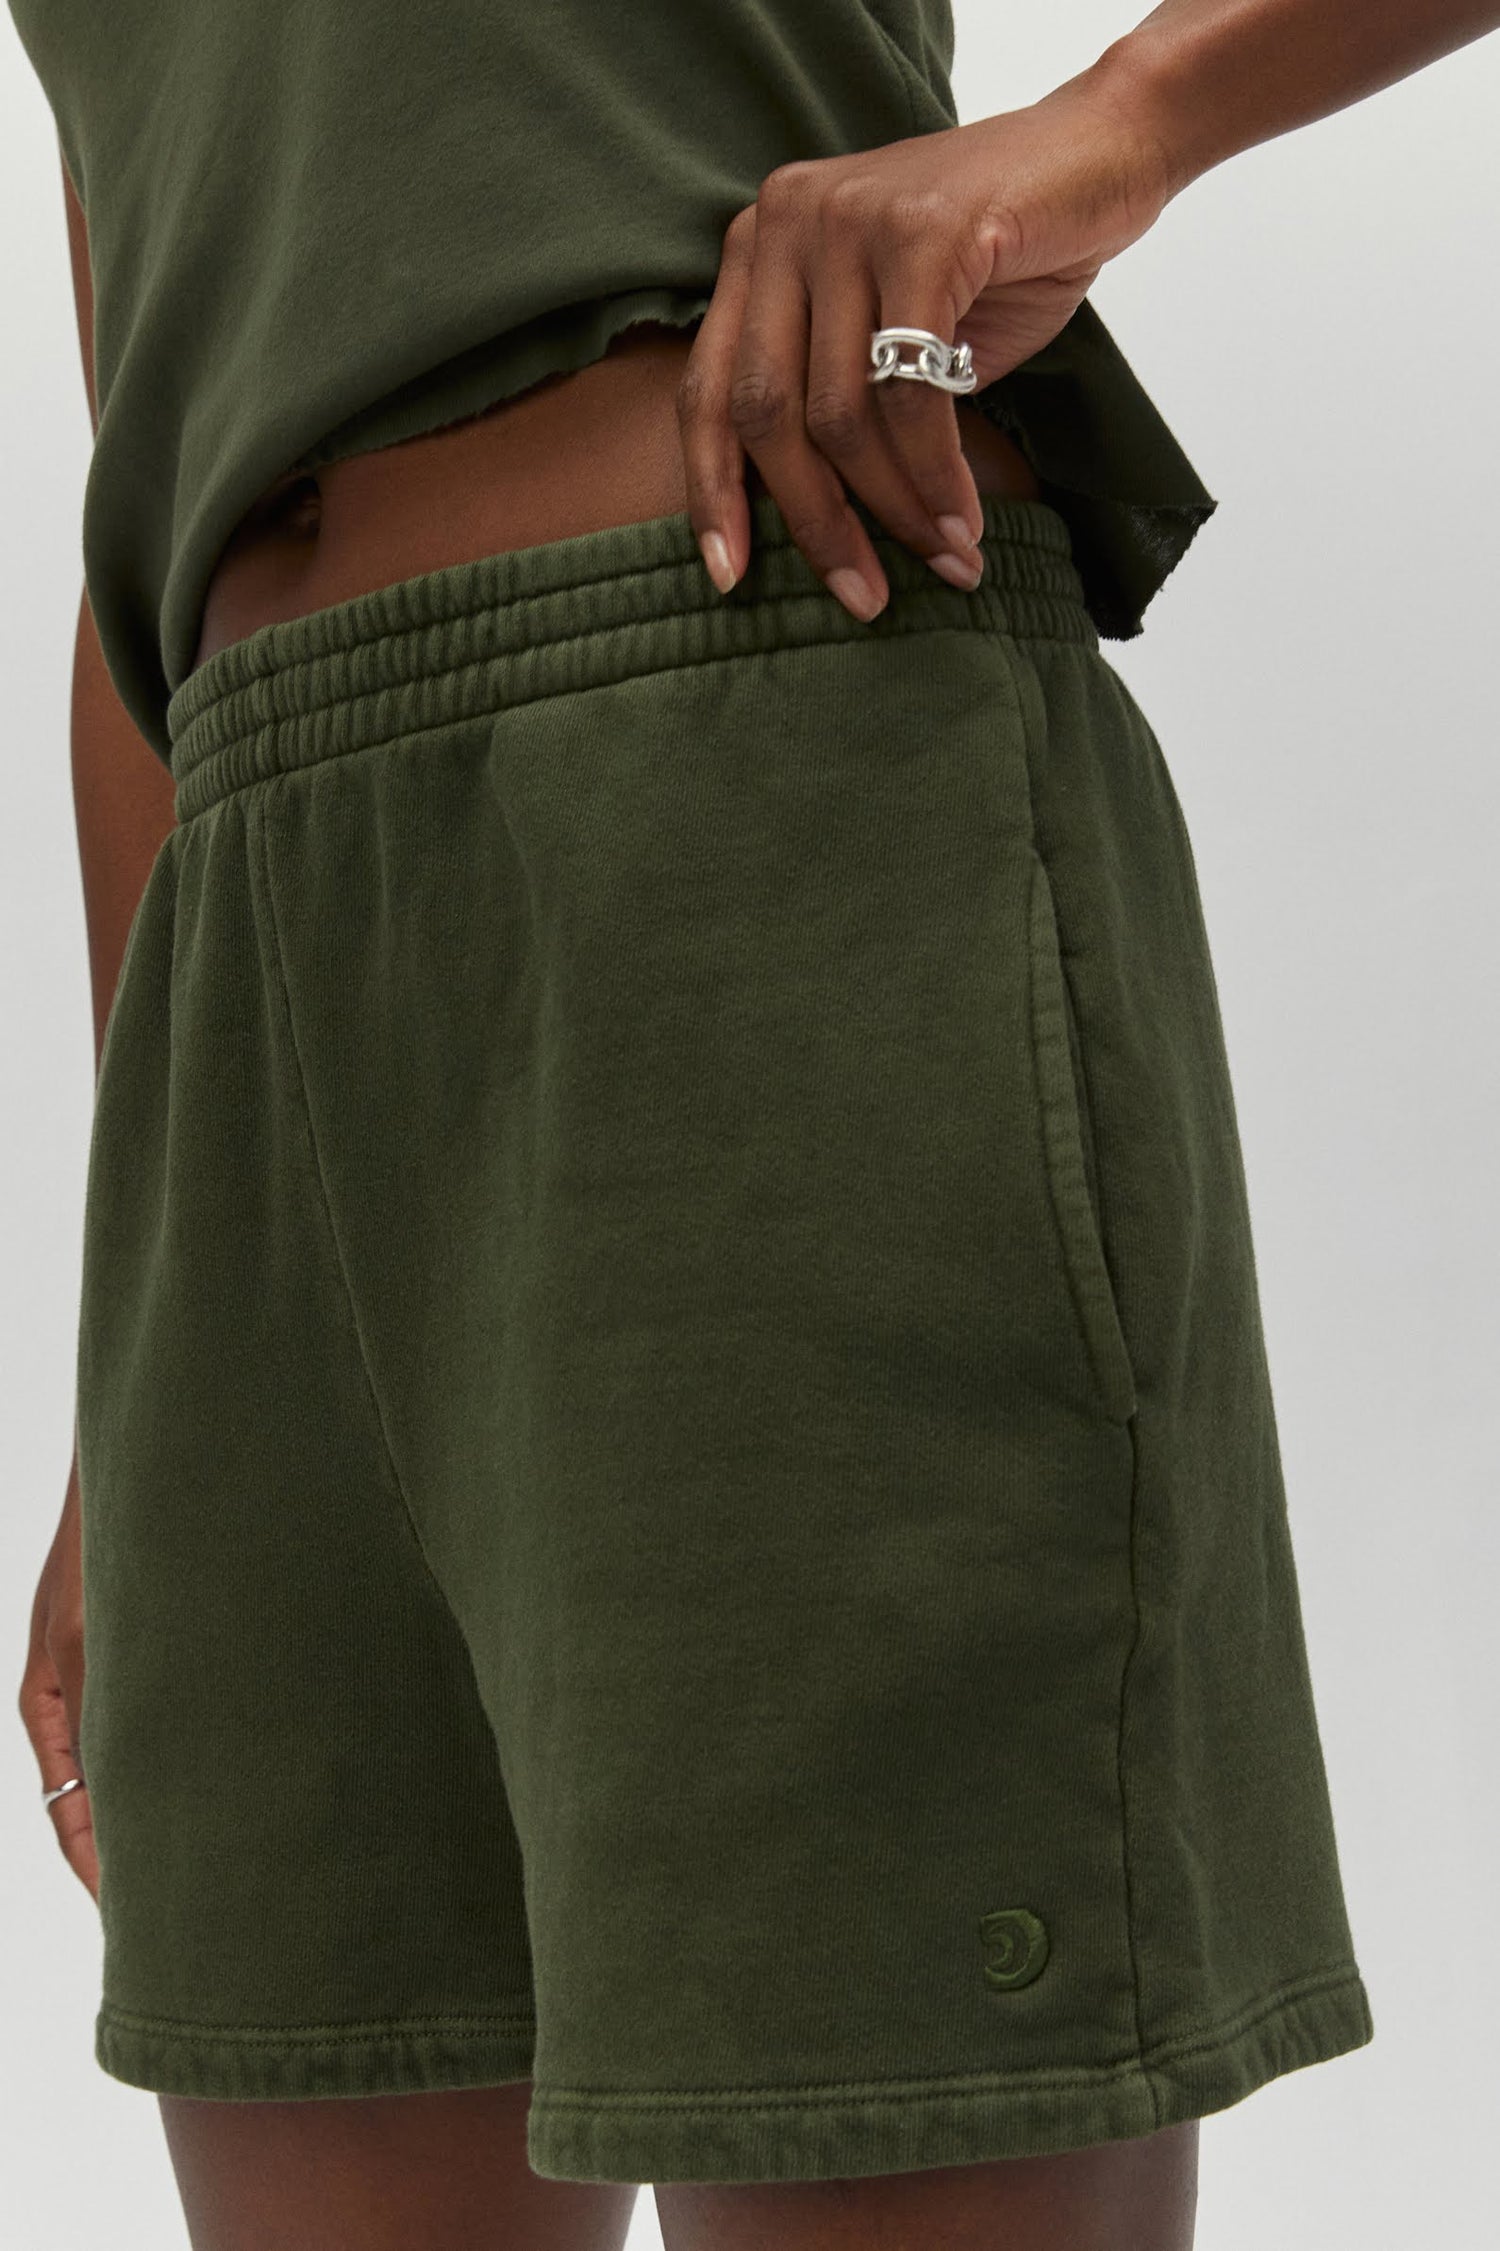 Model wearing boyfriend fitting sweat shorts in military green with a matching tank top.